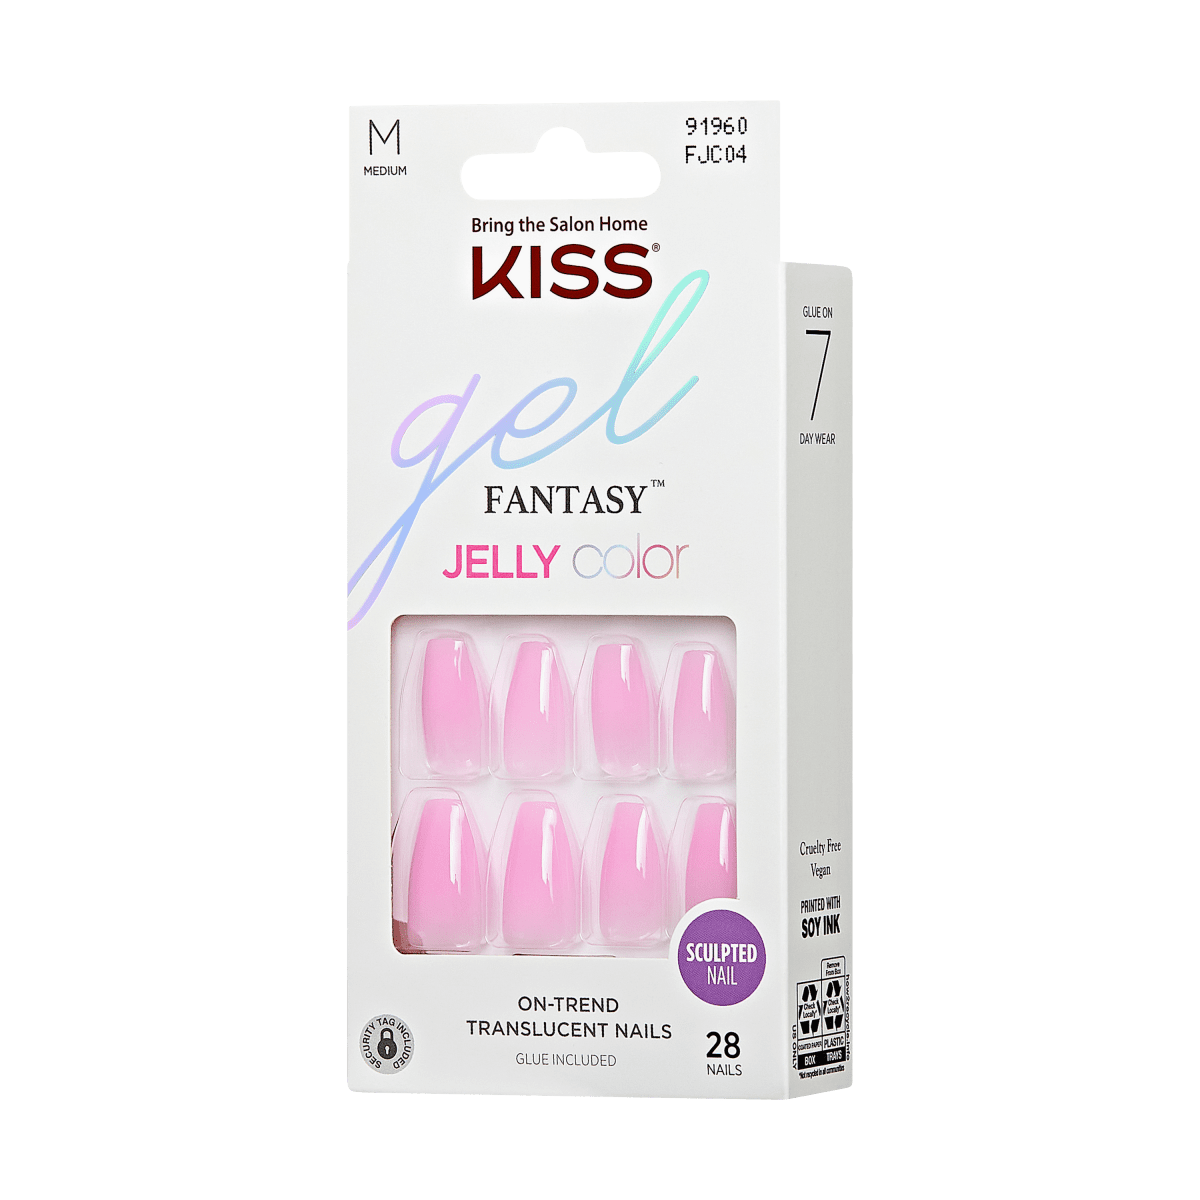 KISS Gel Fantasy Jelly Color Nails - Jelly Case